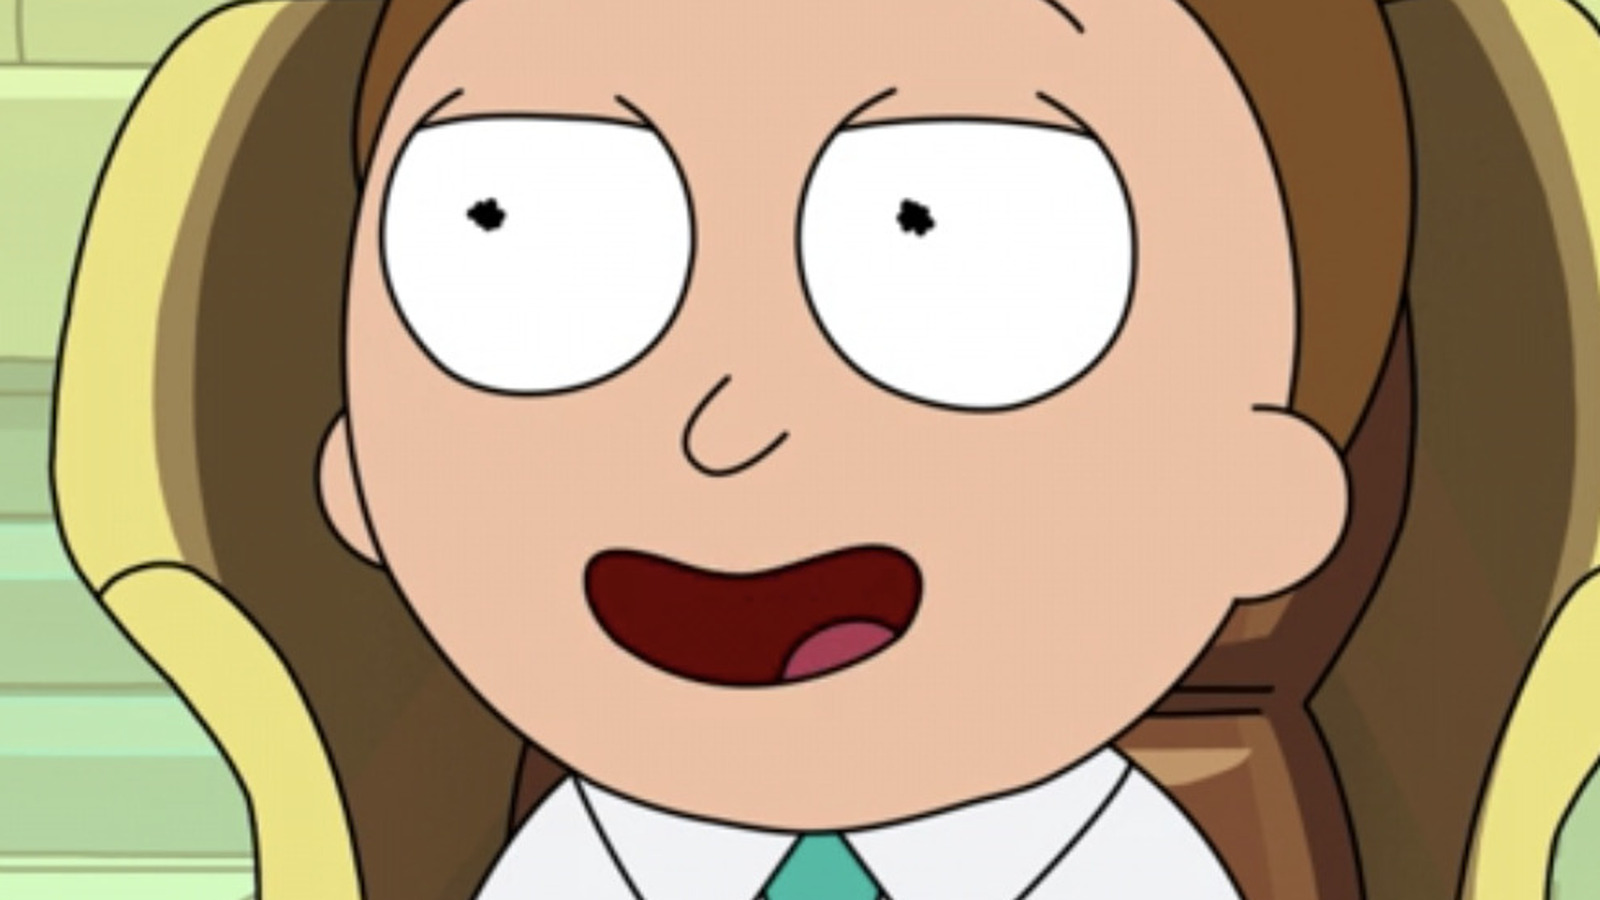 aw-geez-rick-and-morty-season-6-is-coming-sooner-than-you-think